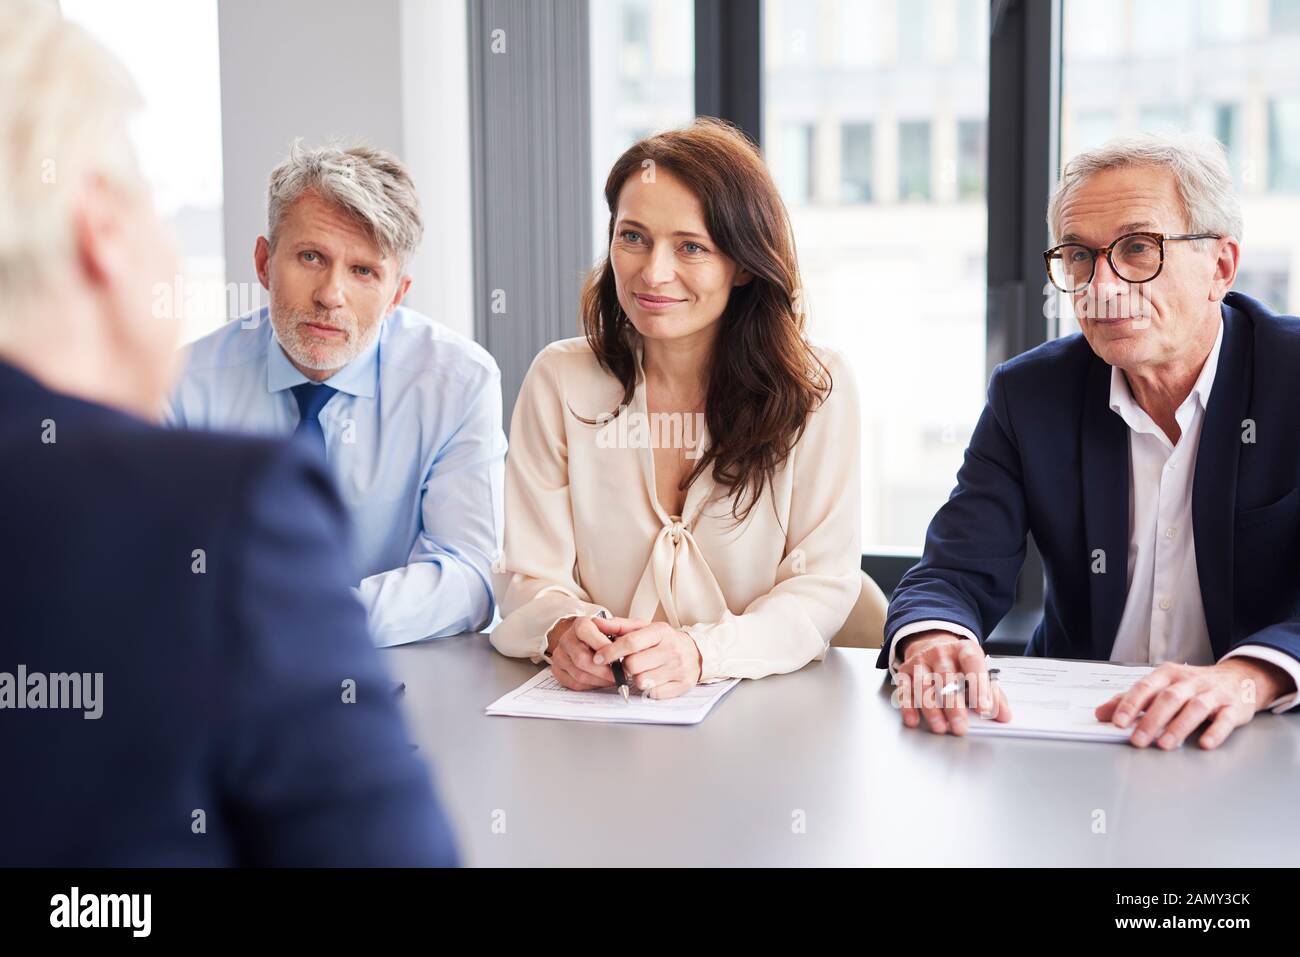 Serious, business talks at conference table Stock Photo